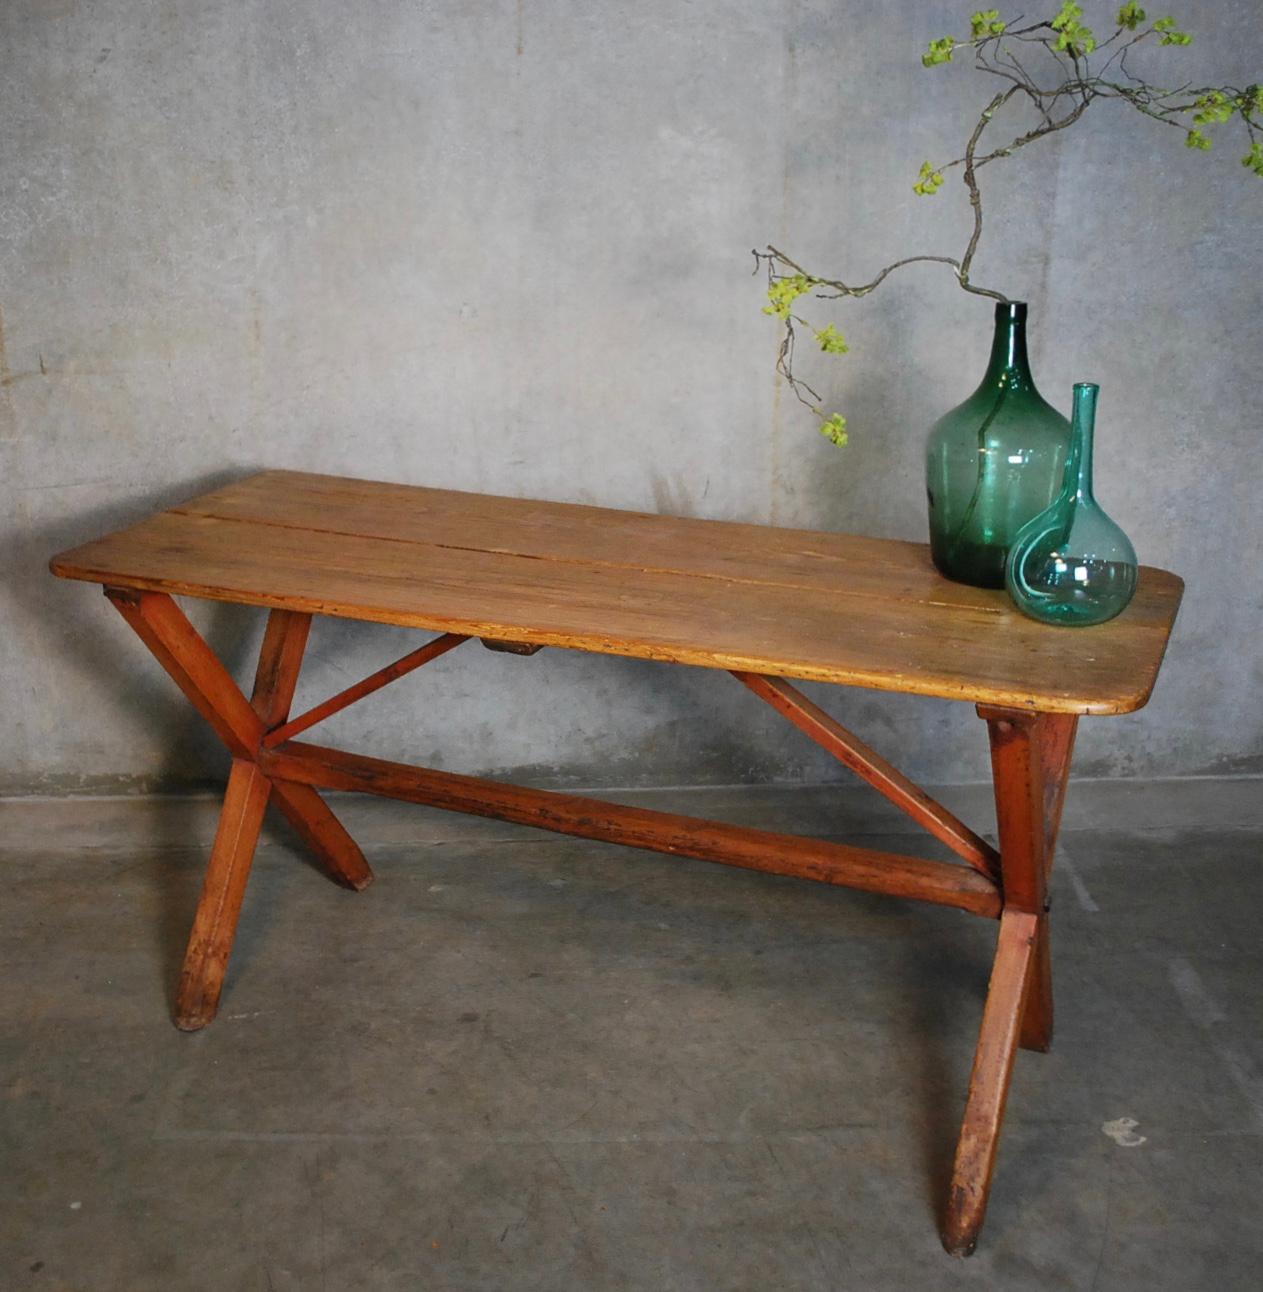 Untouched table showing 2 board scrubbed top, old red finish on base with detailed balanced form.
Table is rock solid. Acquired from a private collection.